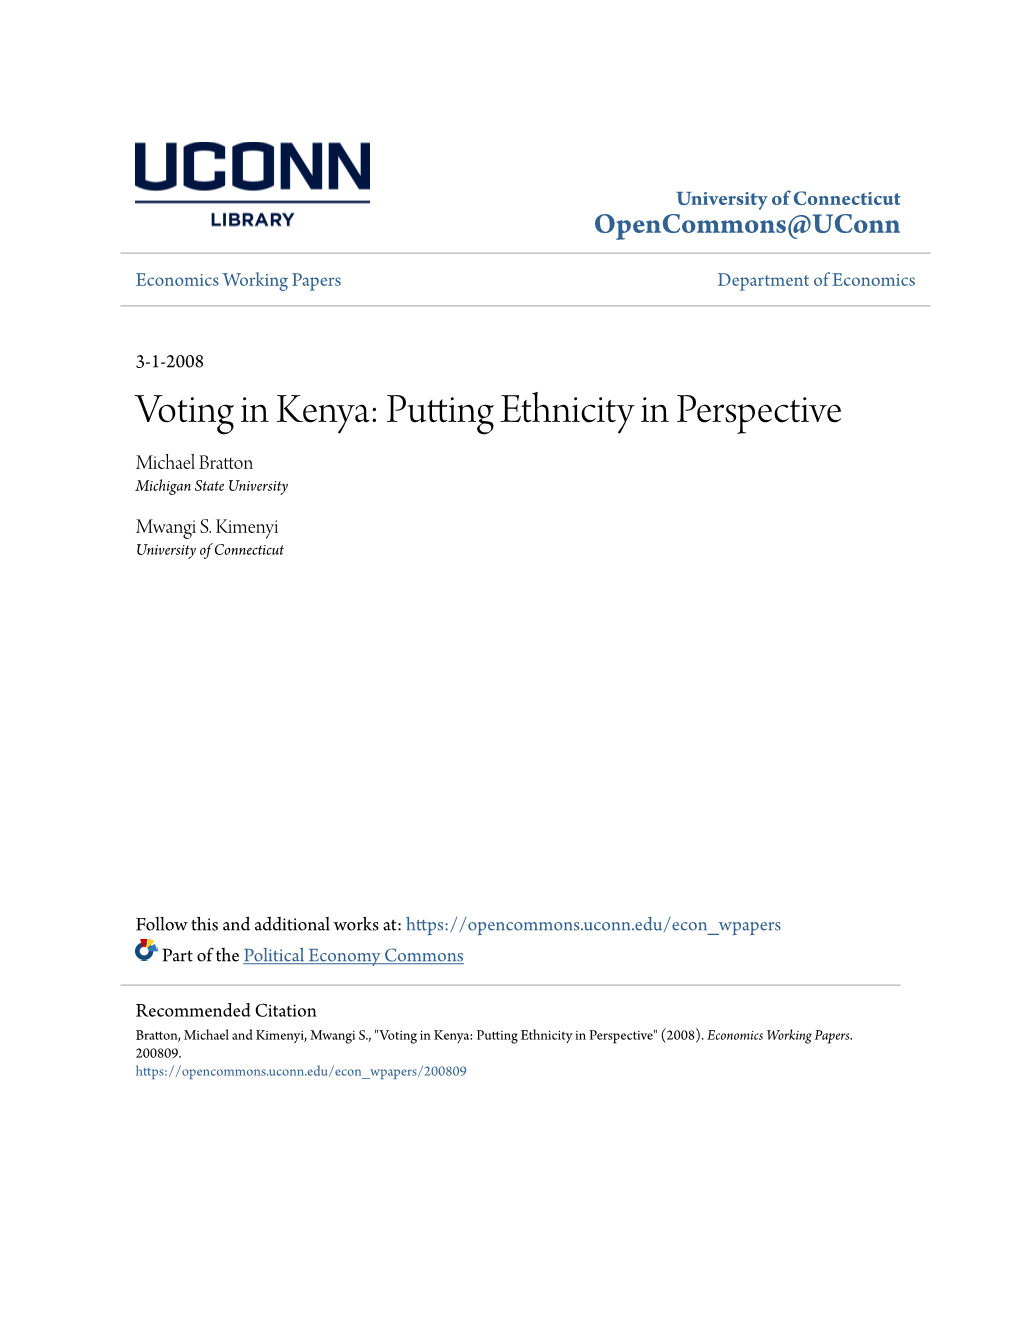 Voting in Kenya: Putting Ethnicity in Perspective Michael Bratton Michigan State University